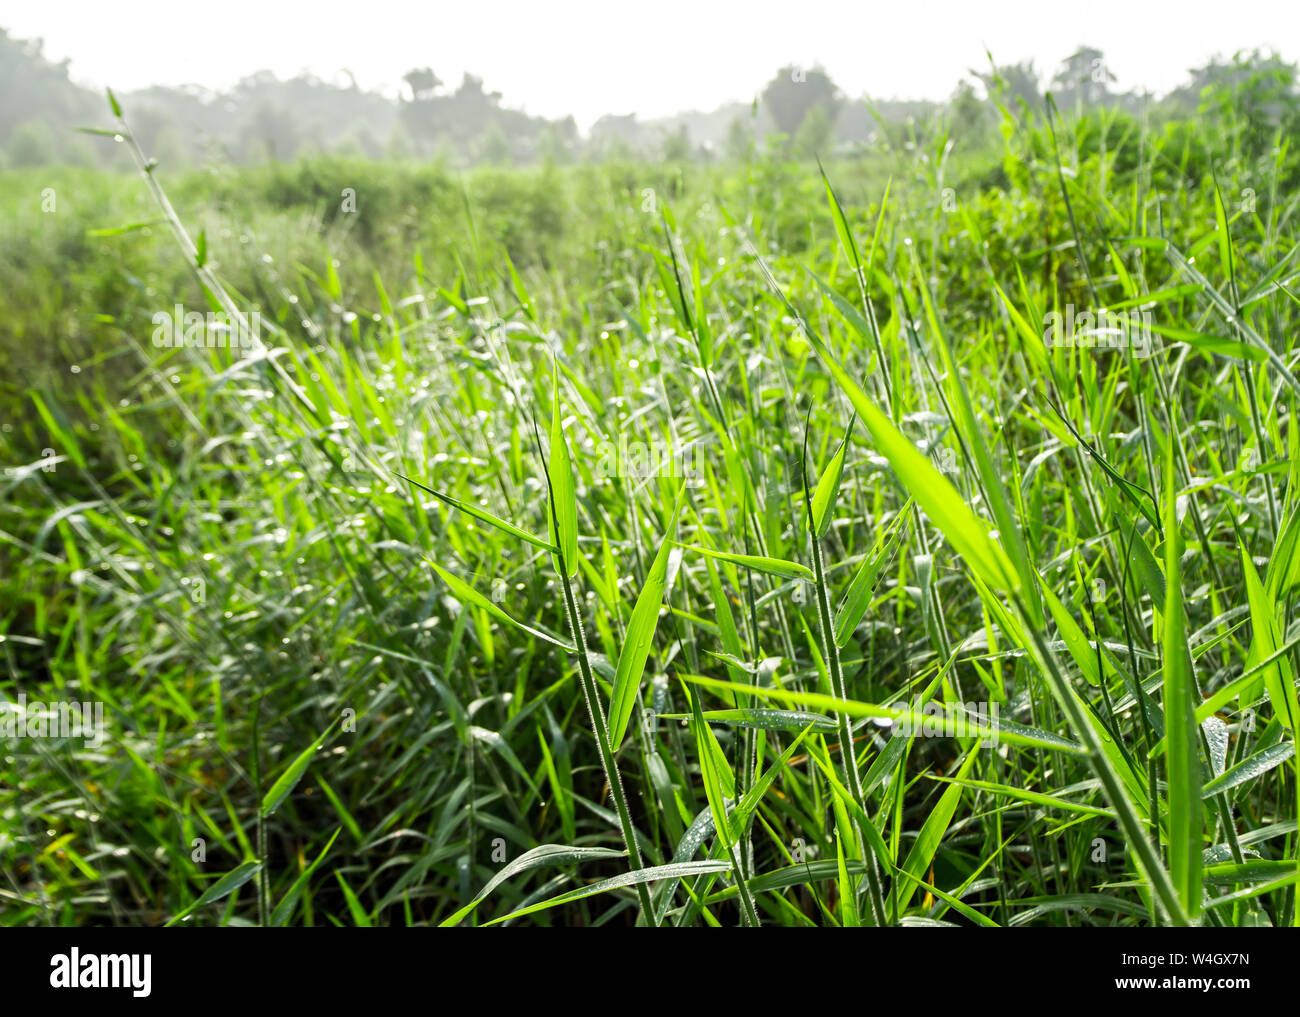 Freshness 'Para Grass' in the countryside grassland Stock Photo